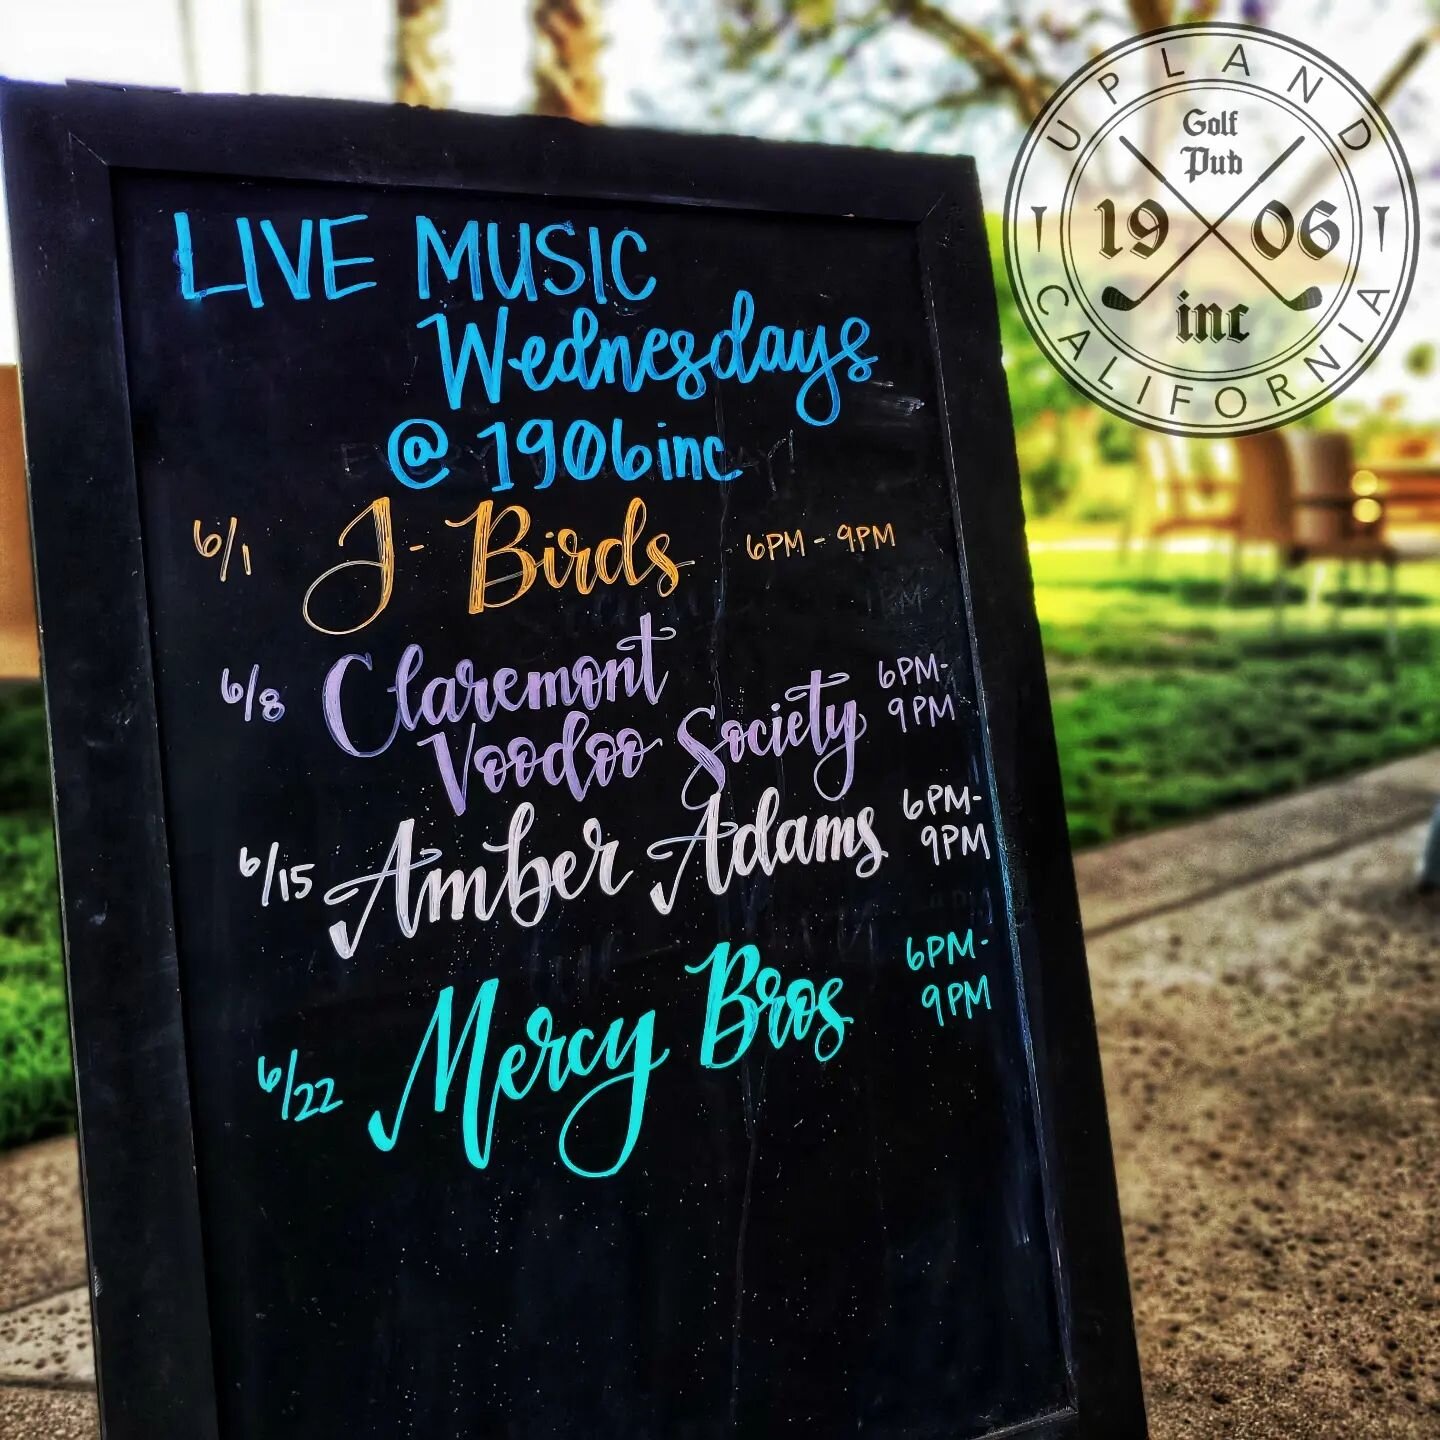 🎵Live Music Wednesday🎵 June lineup
&bull;
&bull;
&bull;
Join us tomorrow for Claremont Voodoo Society from 6pm-9pm!!!
&bull;
&bull;
&bull;
#junelineup #livemusicwednesday #livemusiclineup #livemusicwednesdays #livemusic #barmusic #musiconthepatio #